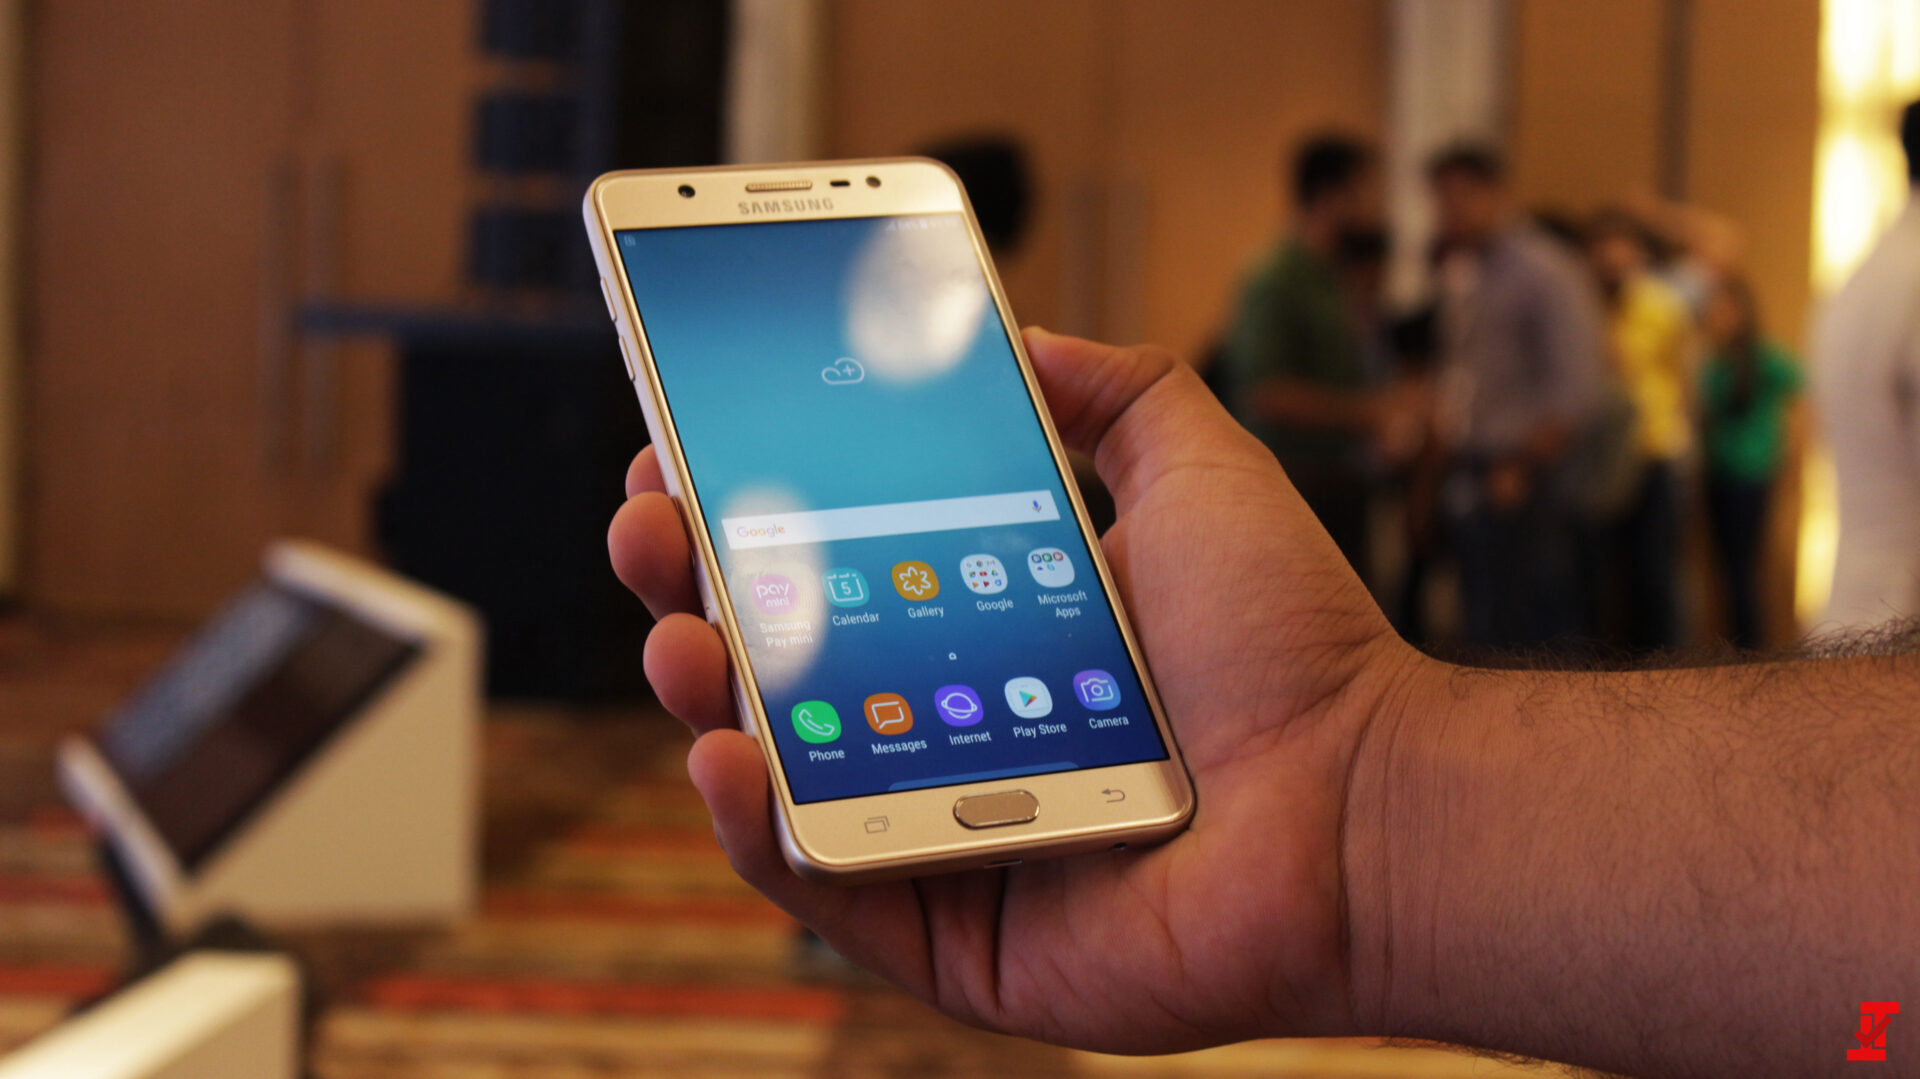 Samsung Galaxy J7 Pro And J7 Max Announced In India Starting At Rs